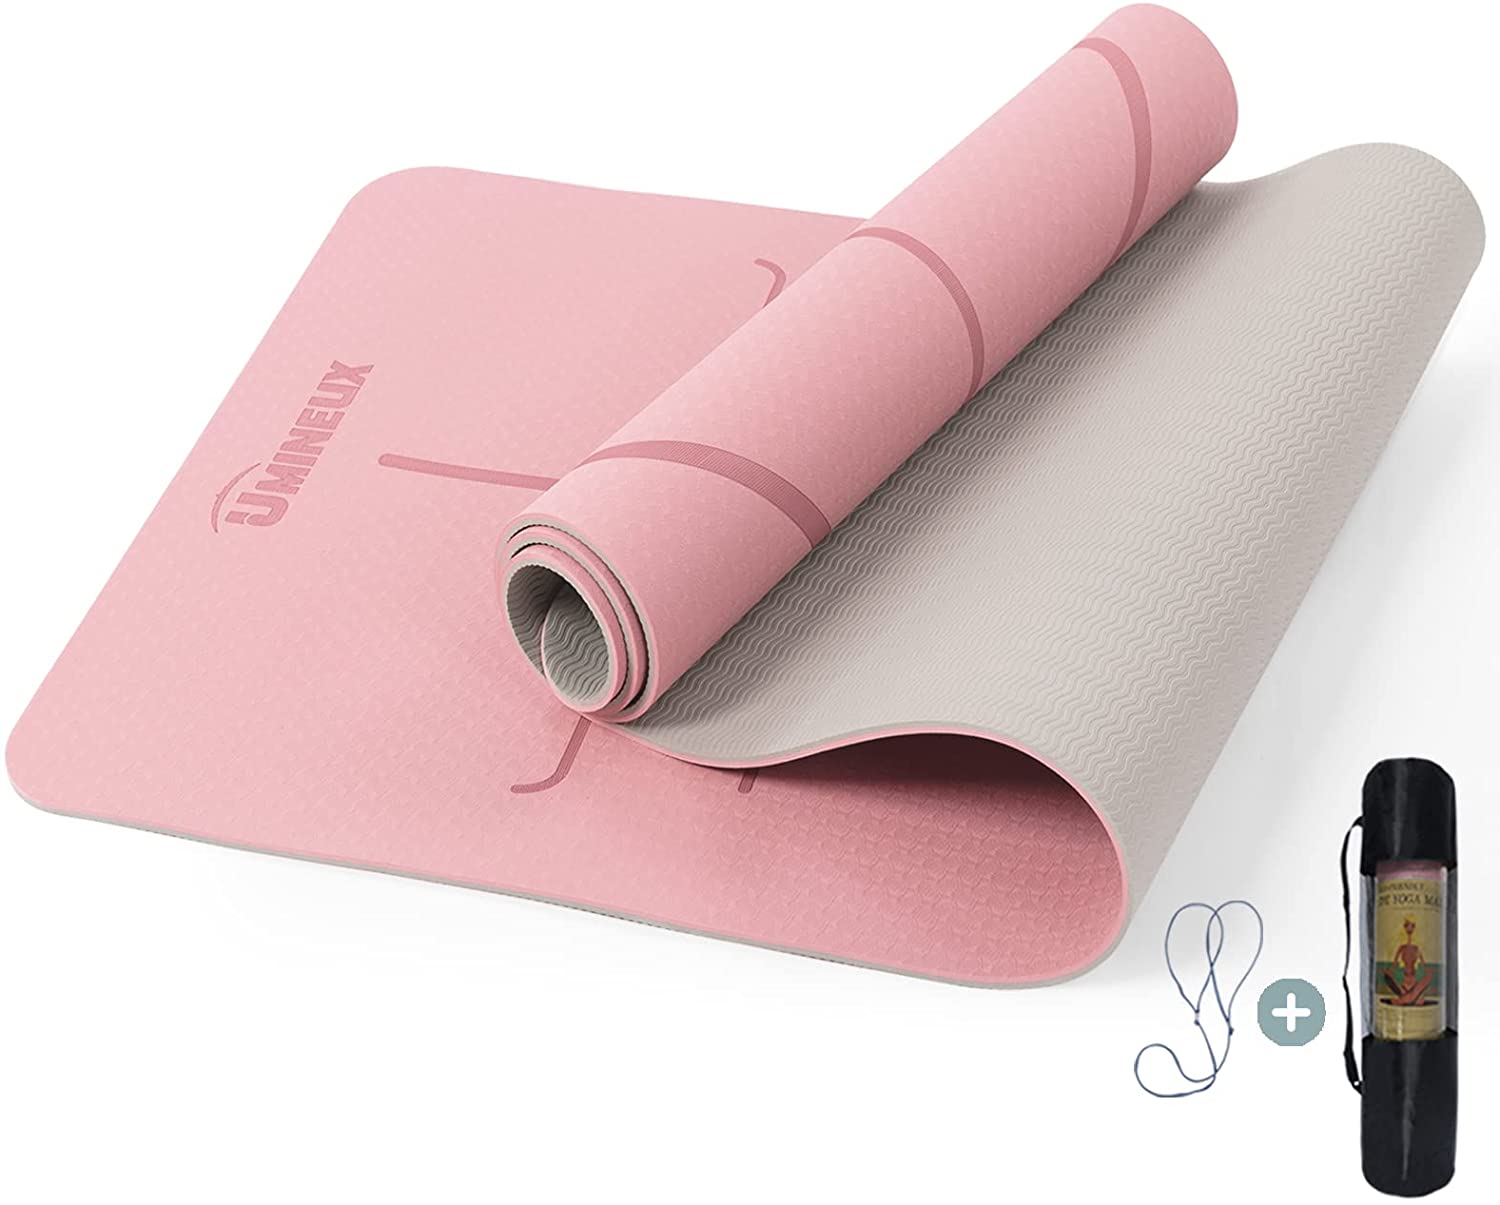 Cushion Your Practice: The Top Thick Non-Slip Yoga Mats of the Year"